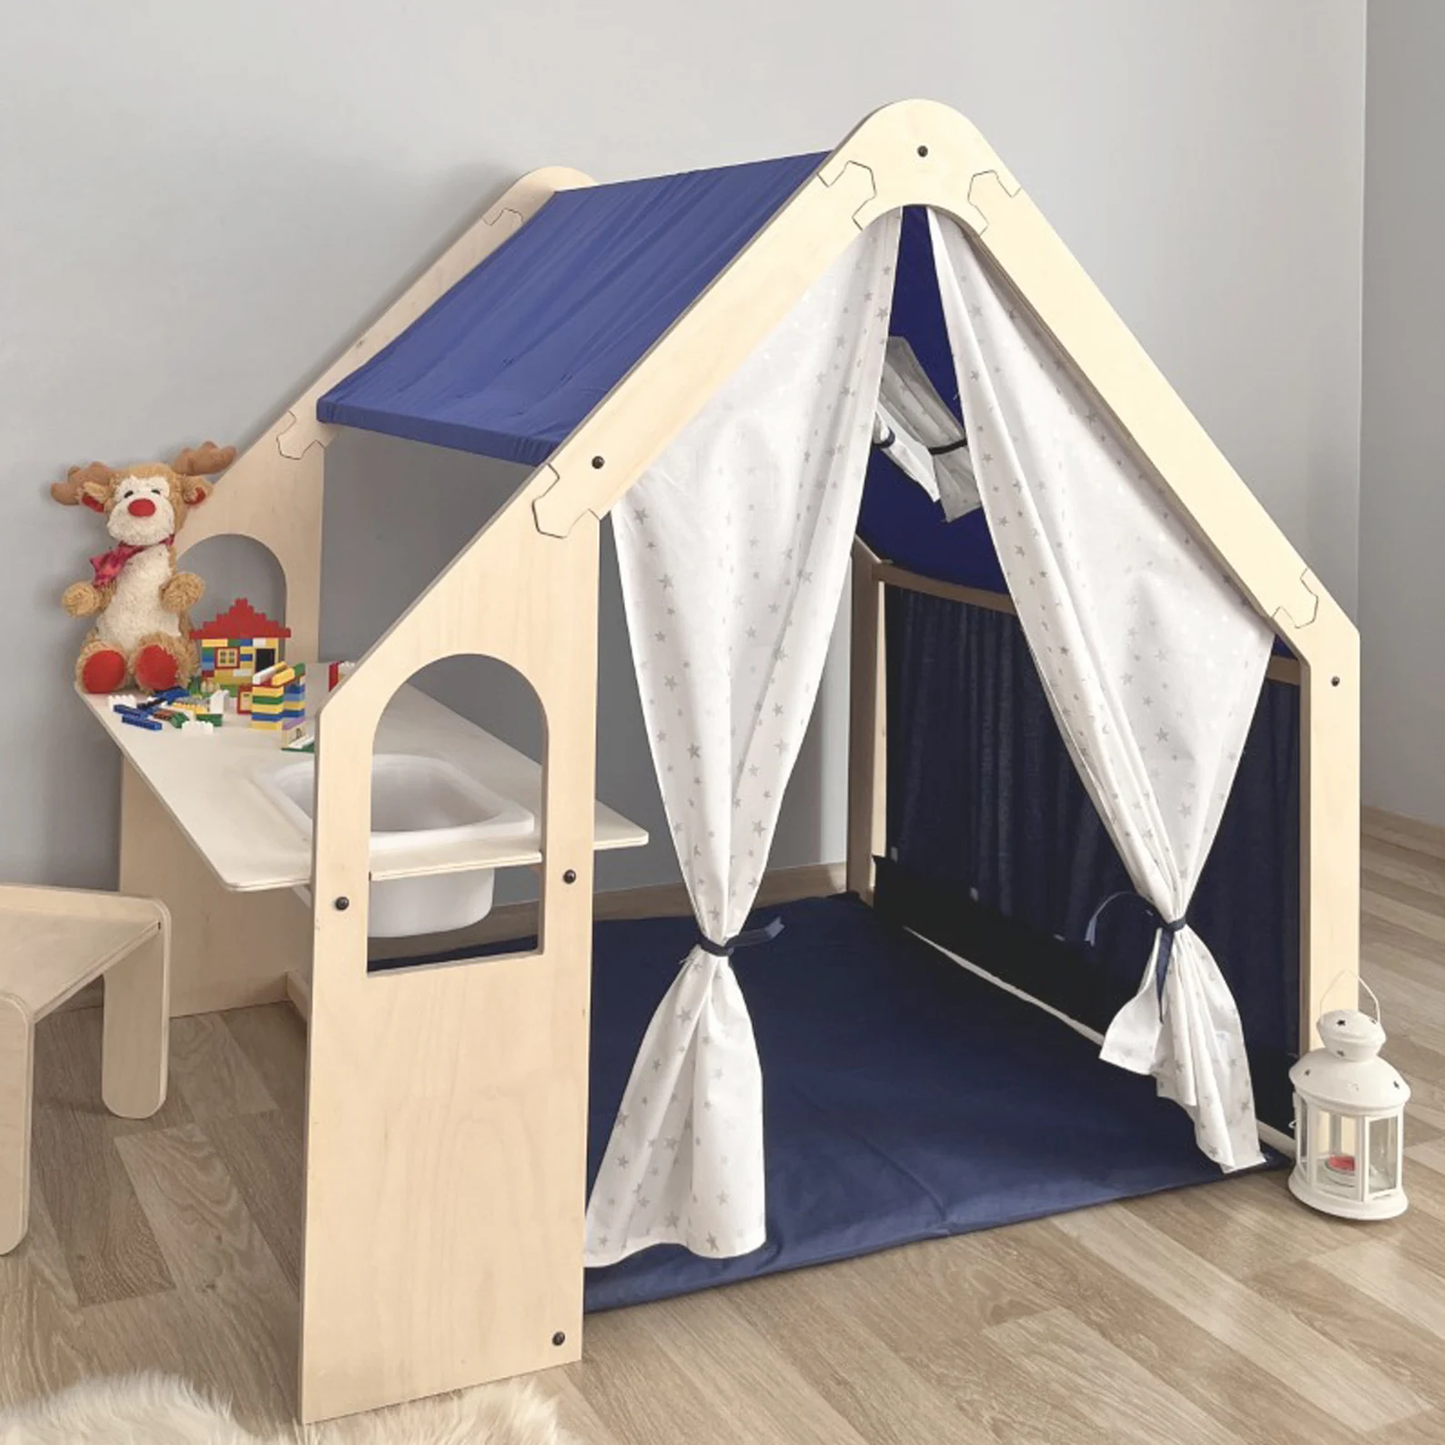 Kids Play House with Pink Tent and White Curtain - Indoor Playhouse with Table and Chair, Kids Play Furniture